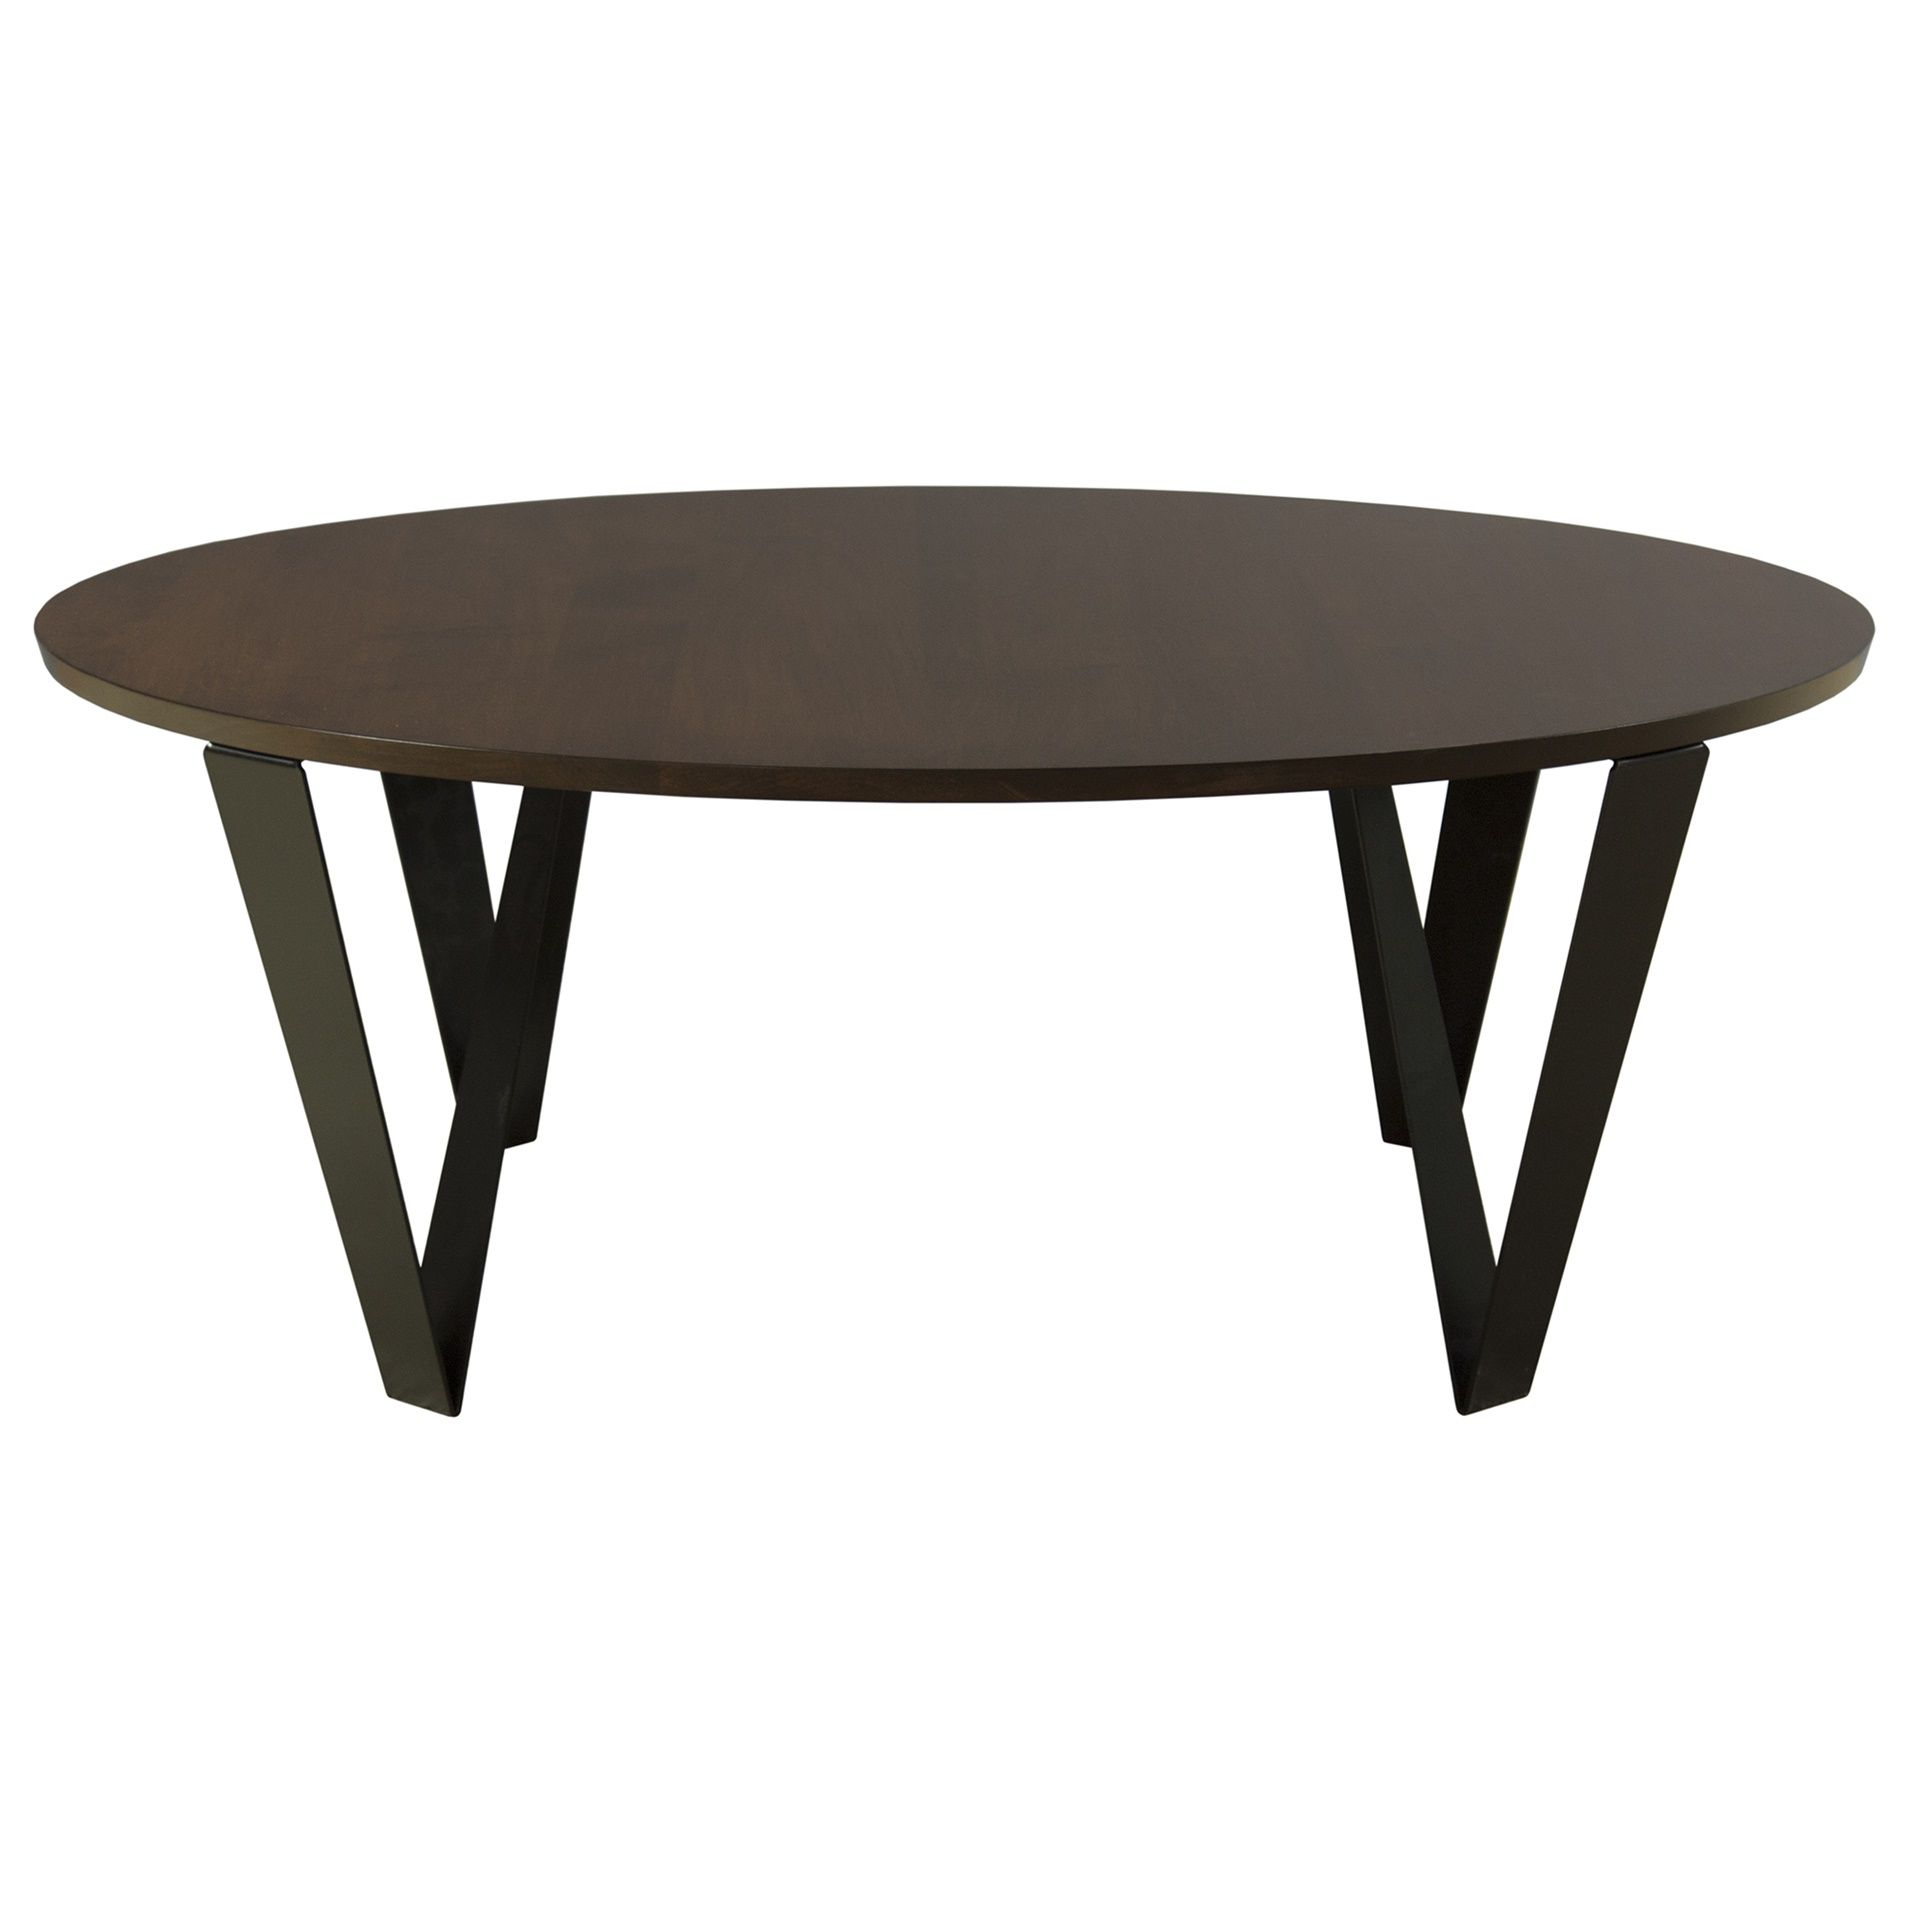 Widely Used Ace Round Cocktail Table Pertaining To Round Cocktail Tables (View 11 of 20)